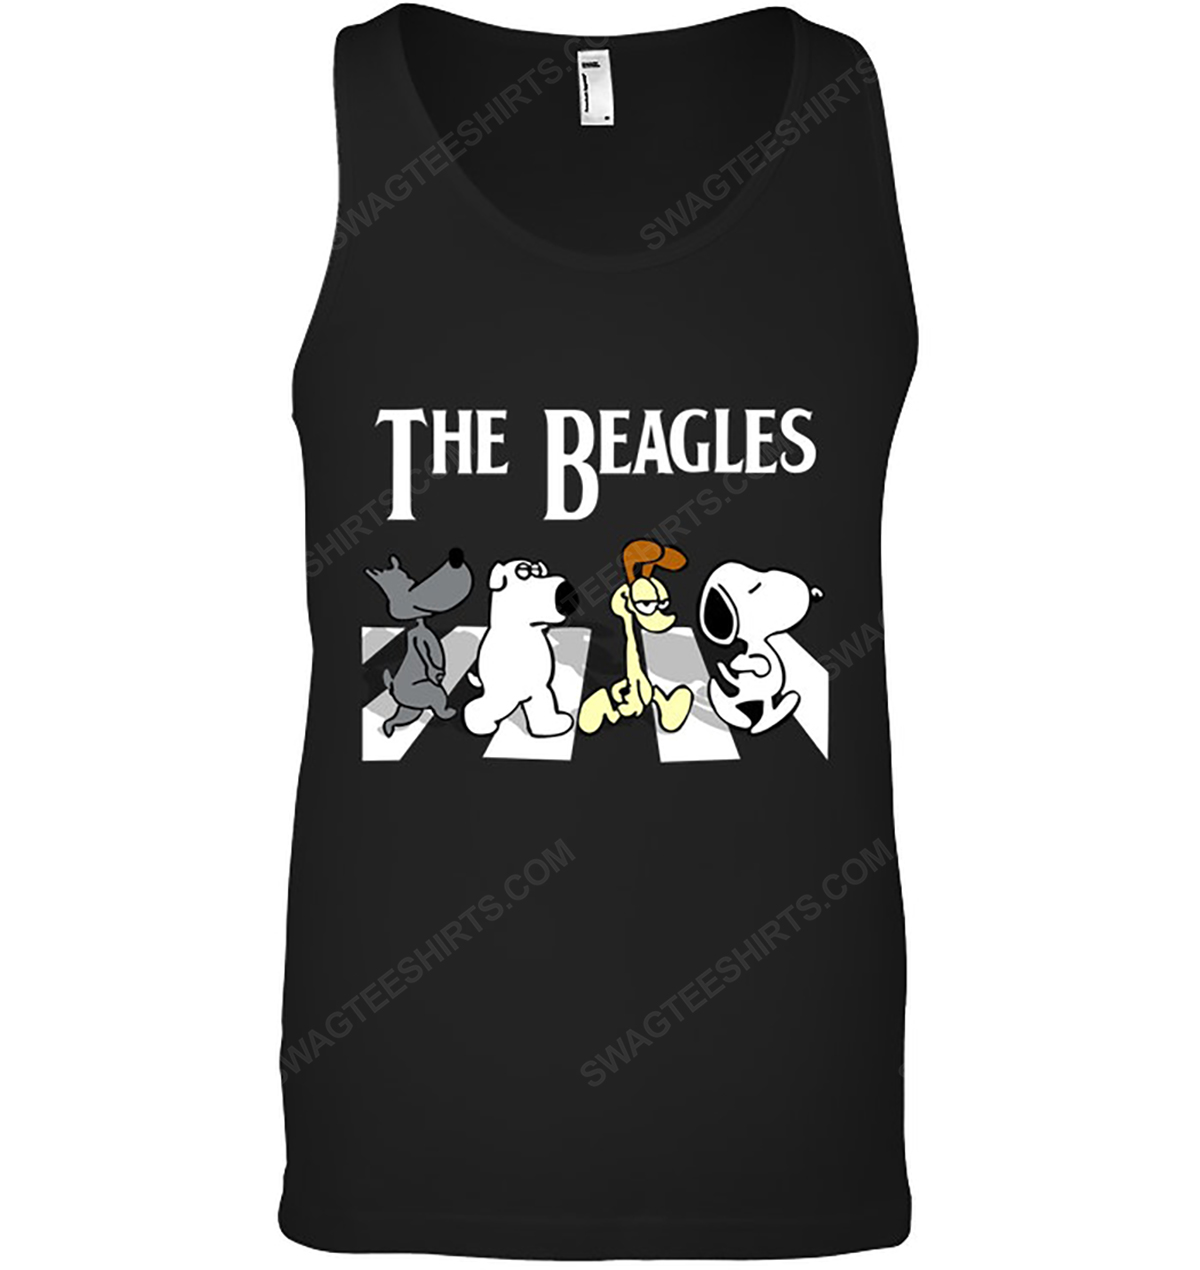 Snoopy and friends the beagles abbey road tank top 1